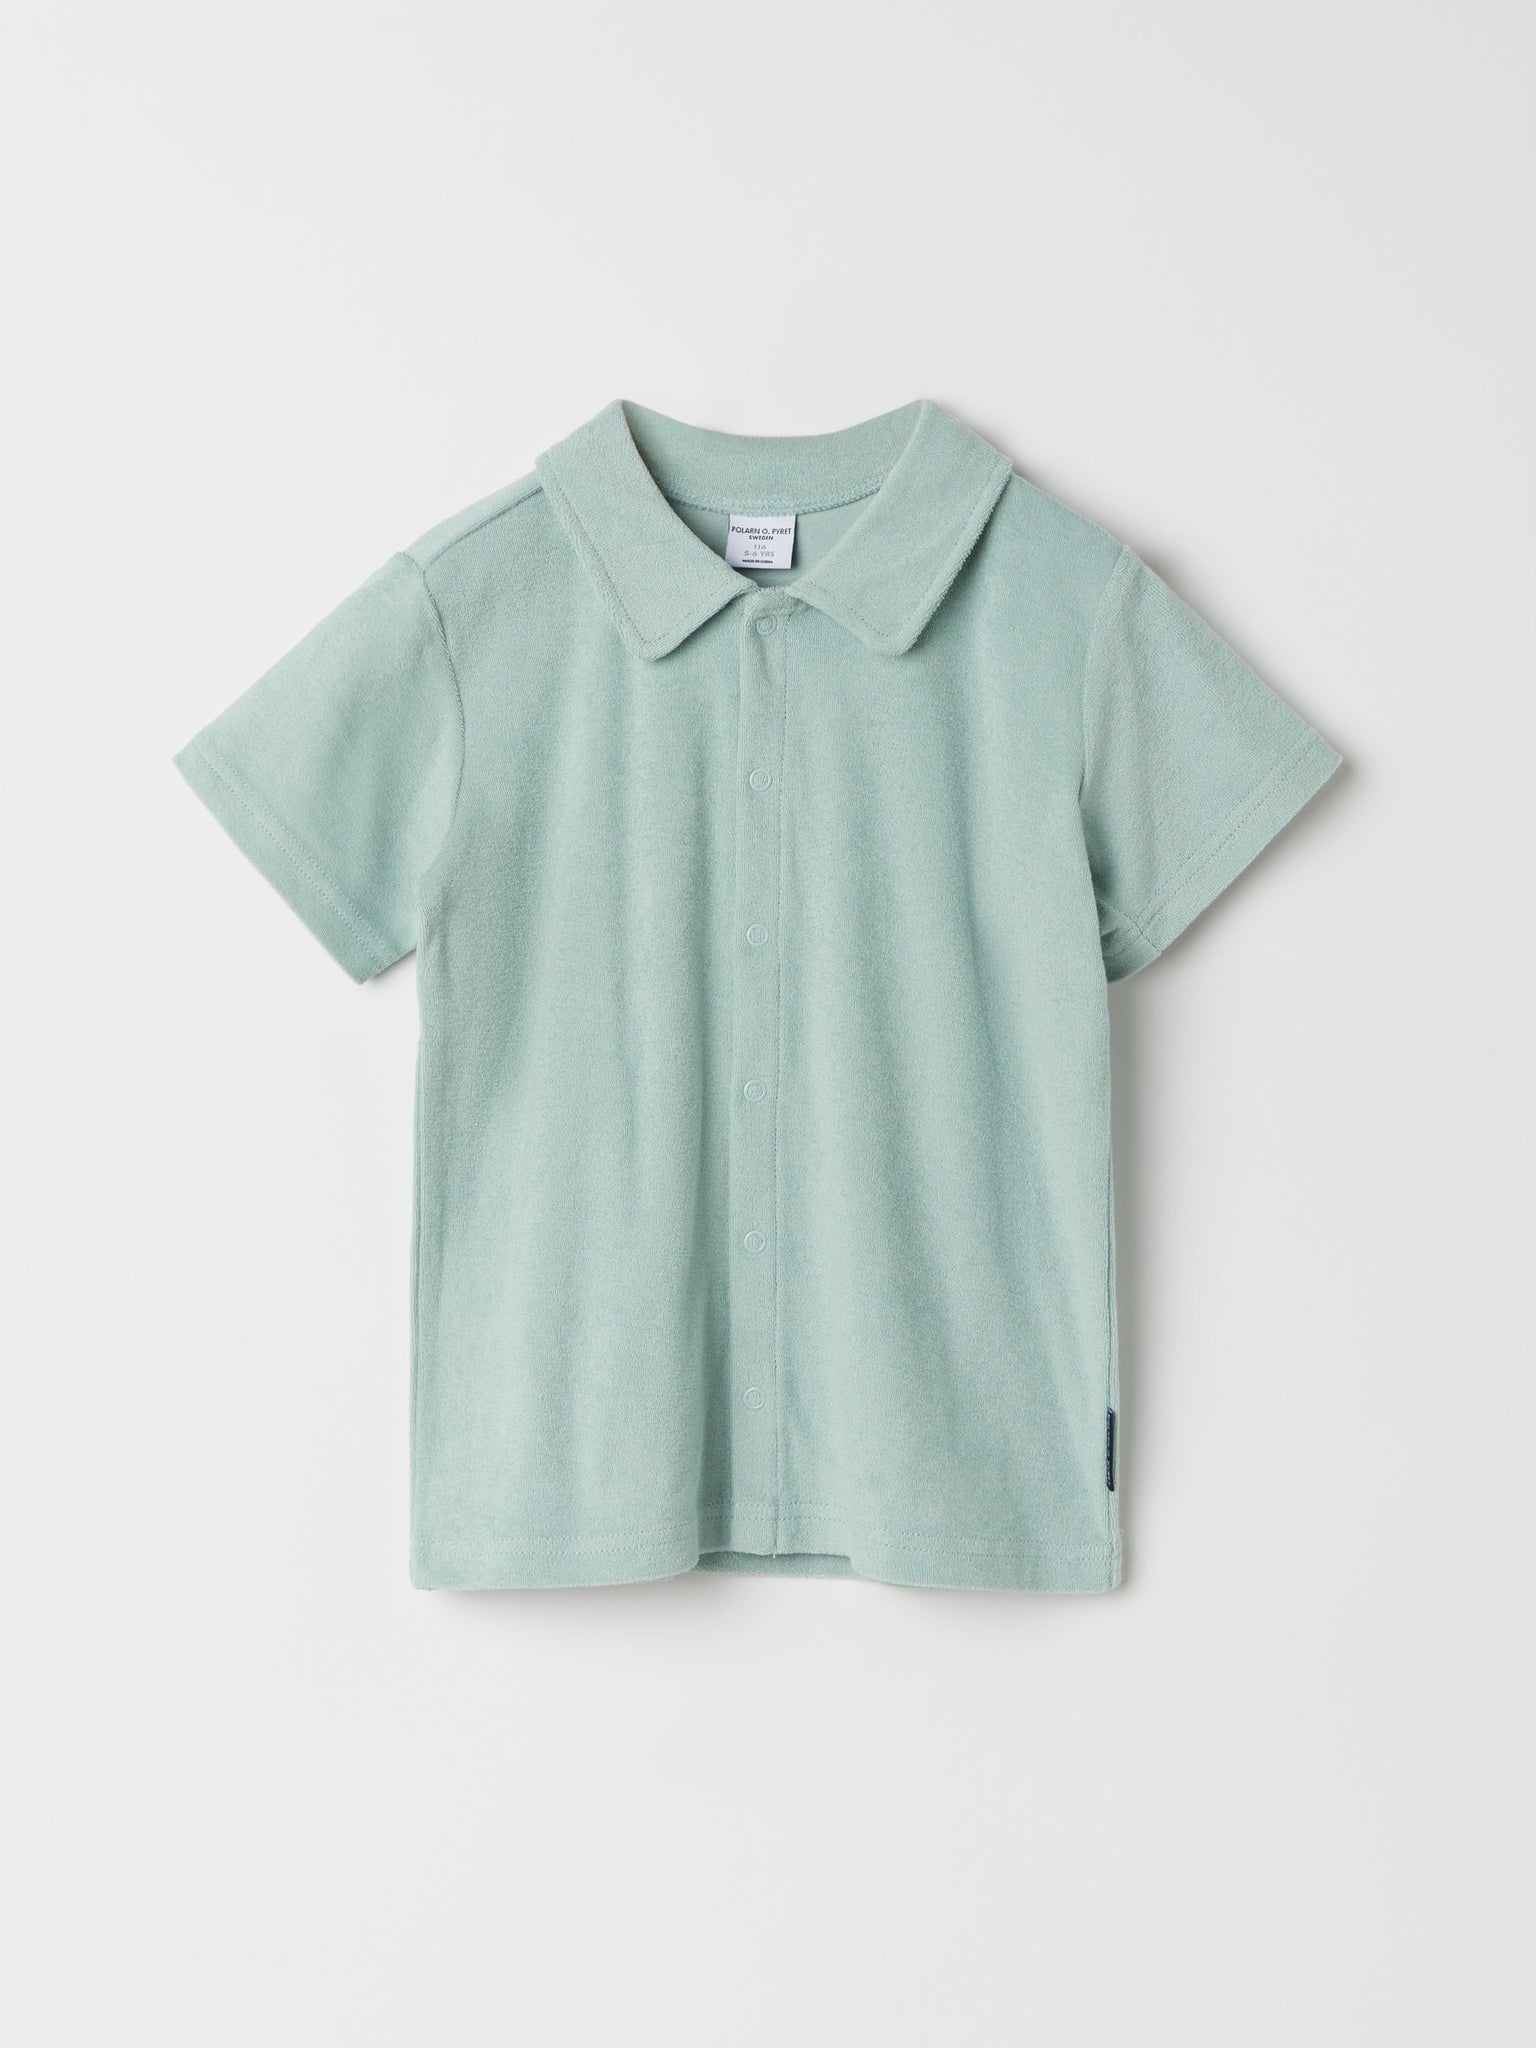 Green Cotton Kids Polo Shirt from the Polarn O. Pyret kidswear collection. Ethically produced kids clothing.